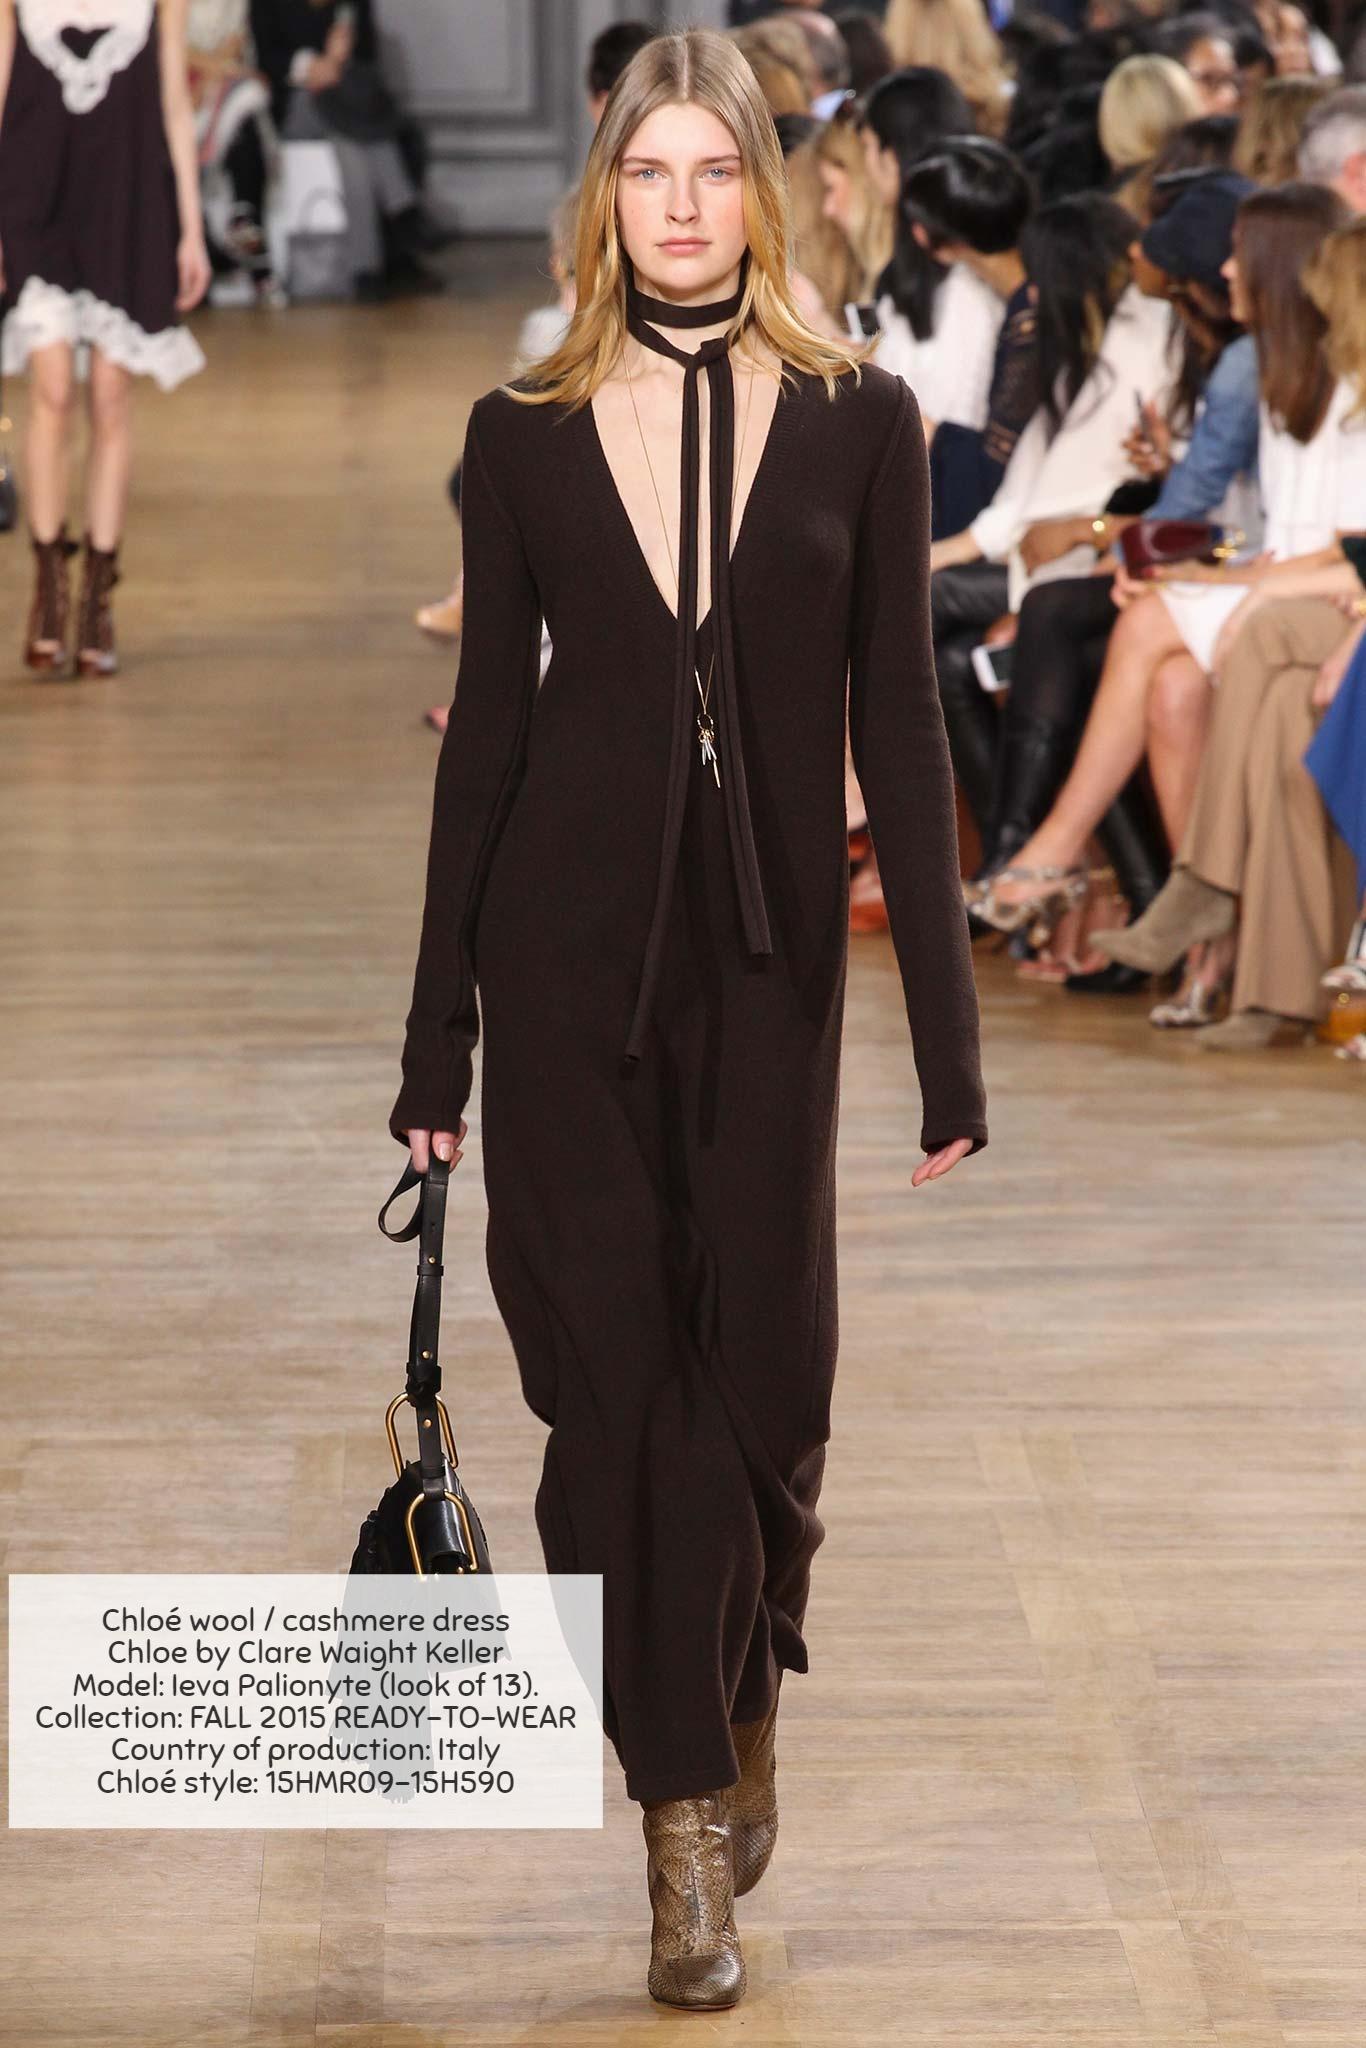 Chloé FALL 2015 RTW runway wool cashmere dress Clare Waight Keller READY-TO-WEAR In Excellent Condition For Sale In Алматинский Почтамт, KZ